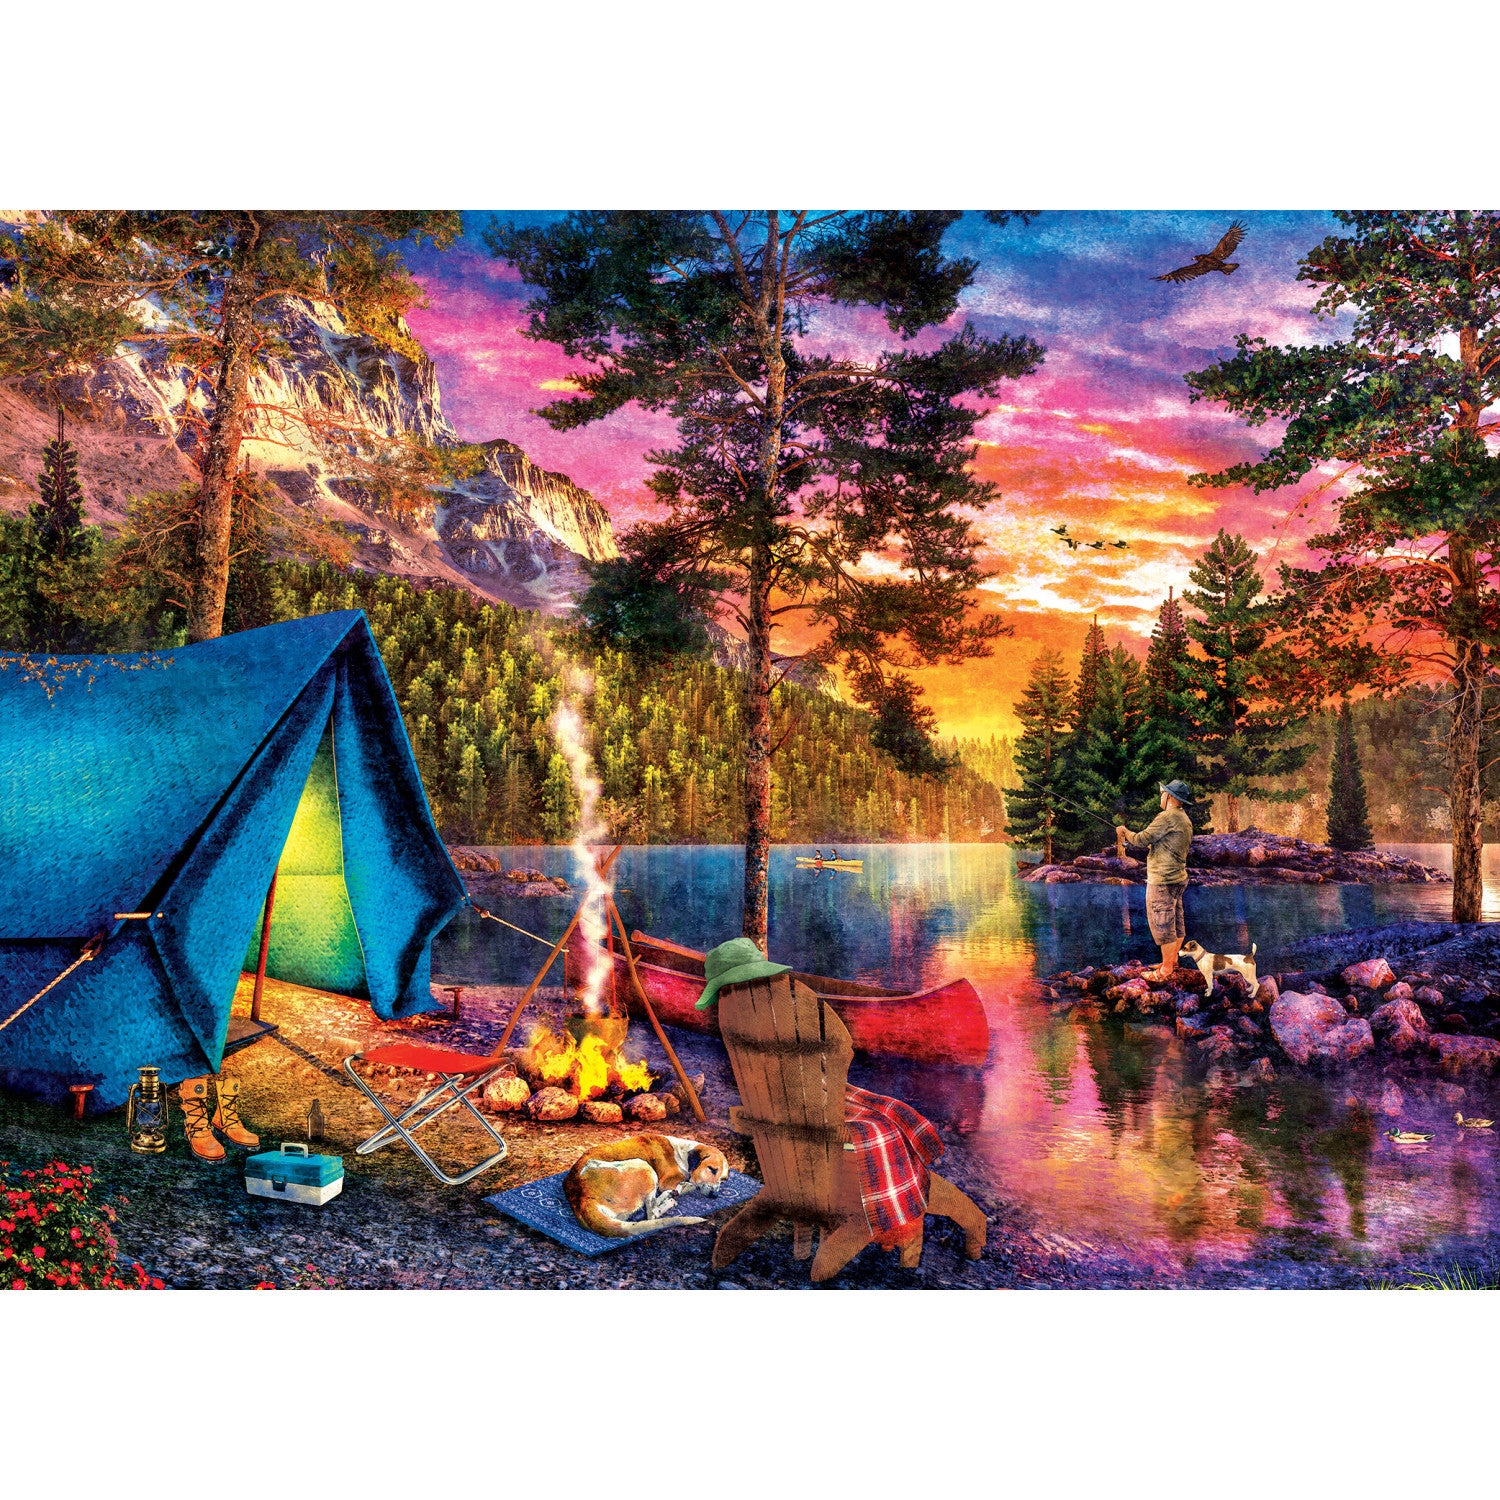 Realtree - The One That Got Away 1000 Piece Jigsaw Puzzle | Masterpieces